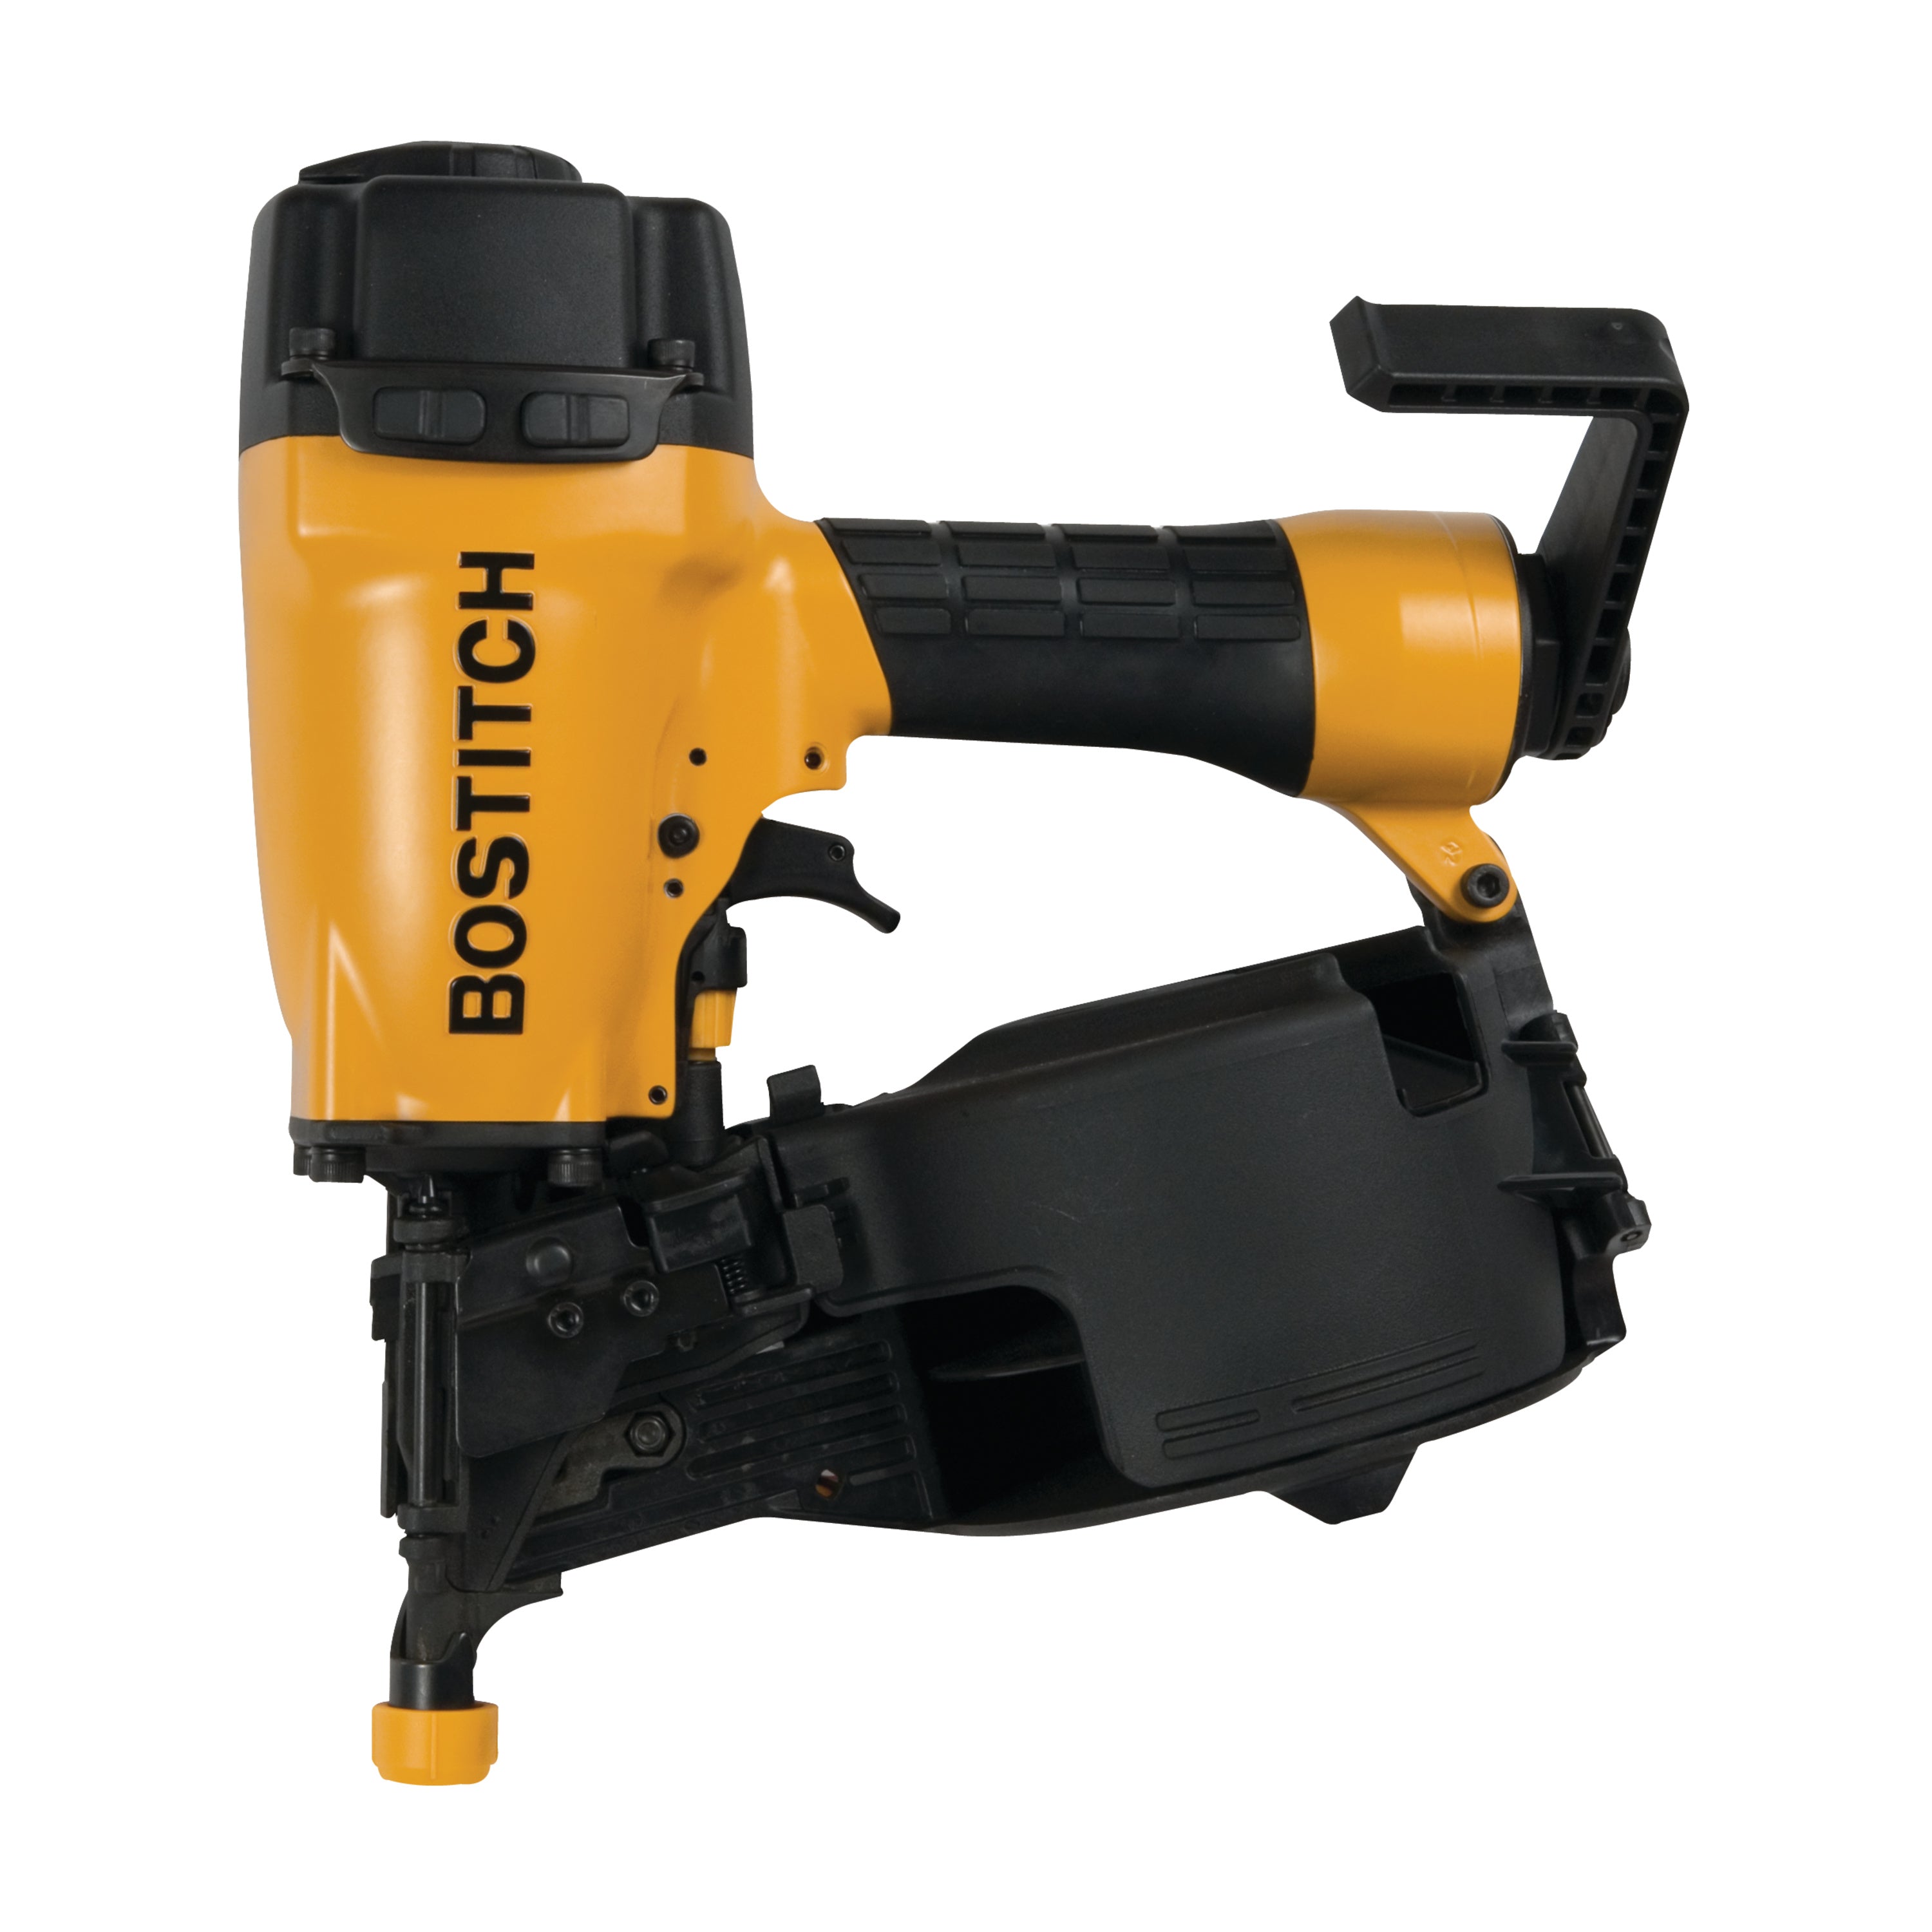 Bostitch, BOSTITCH 1-1/4" To 2-1/2" Coil Siding Nailer w/ Aluminum Housing